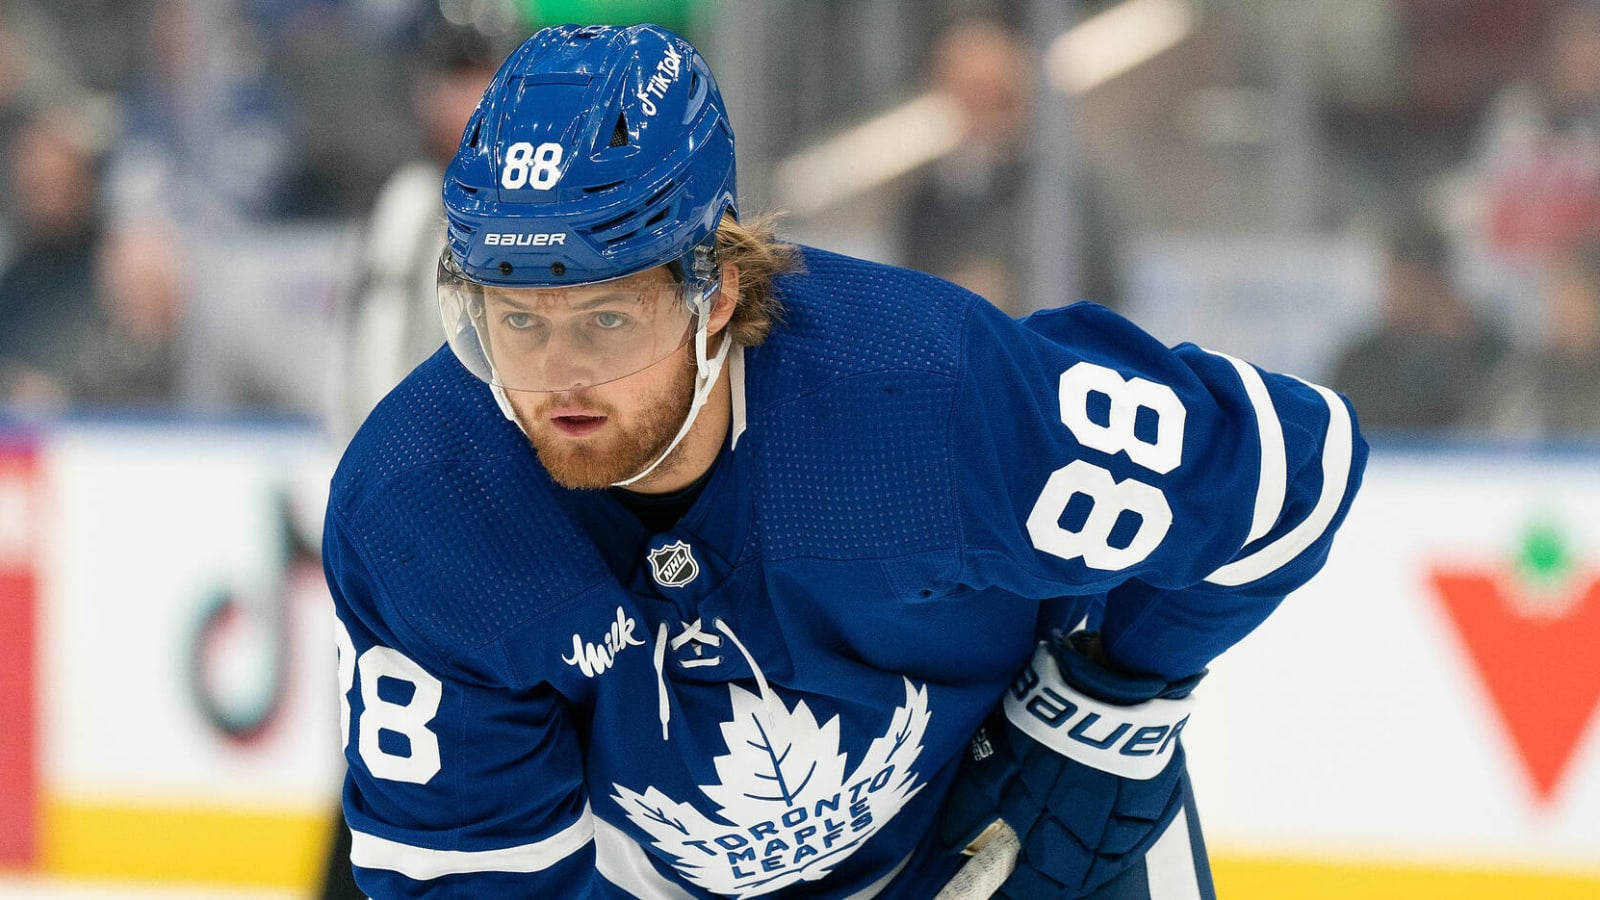 Toronto Maple Leafs Right Wing William Nylander in warmups wearing